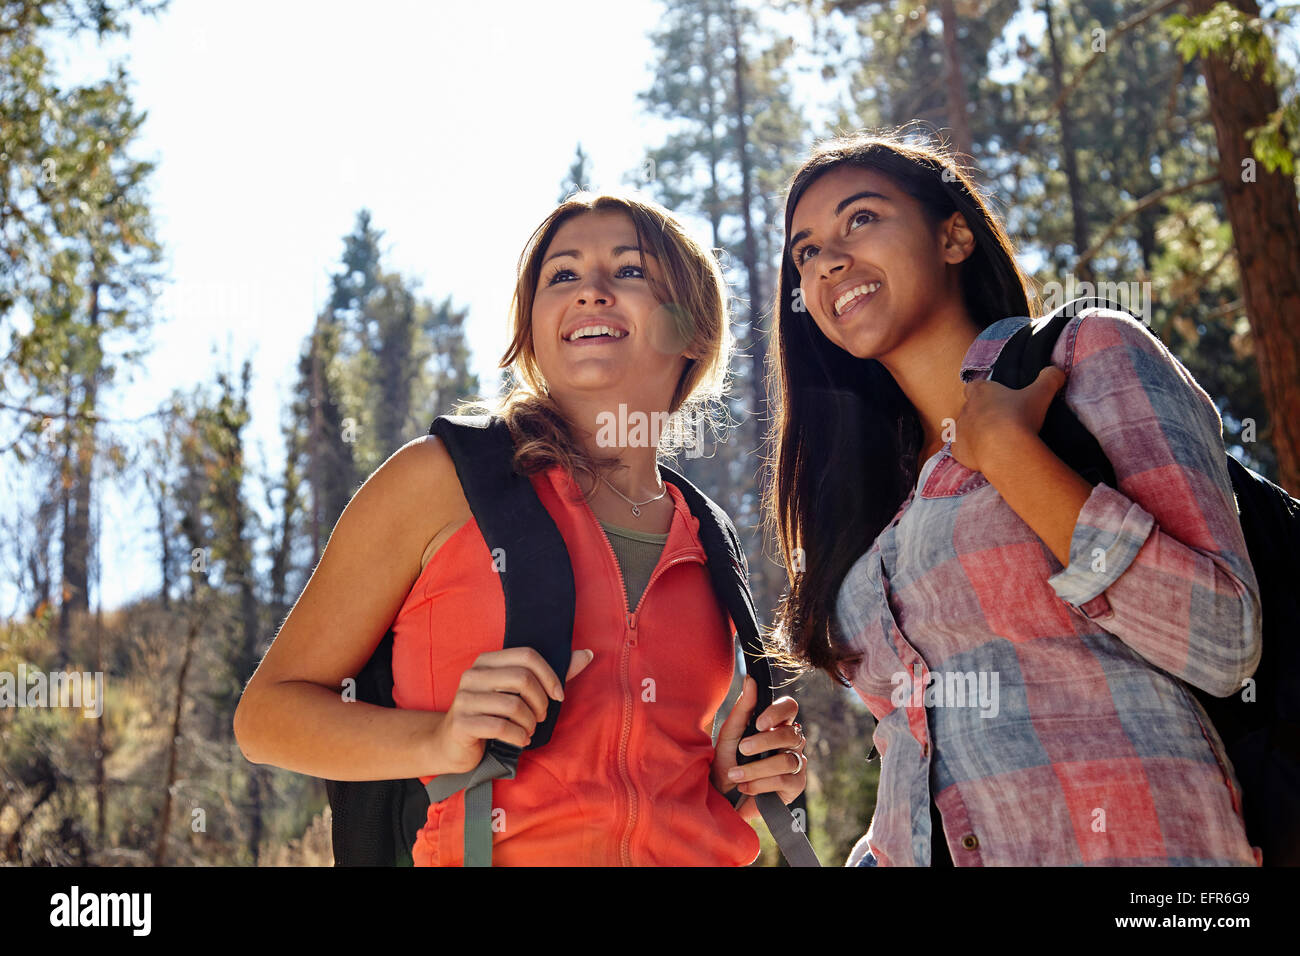 Two young adult females hiking in forest, Los Angeles, California, USA Stock Photo